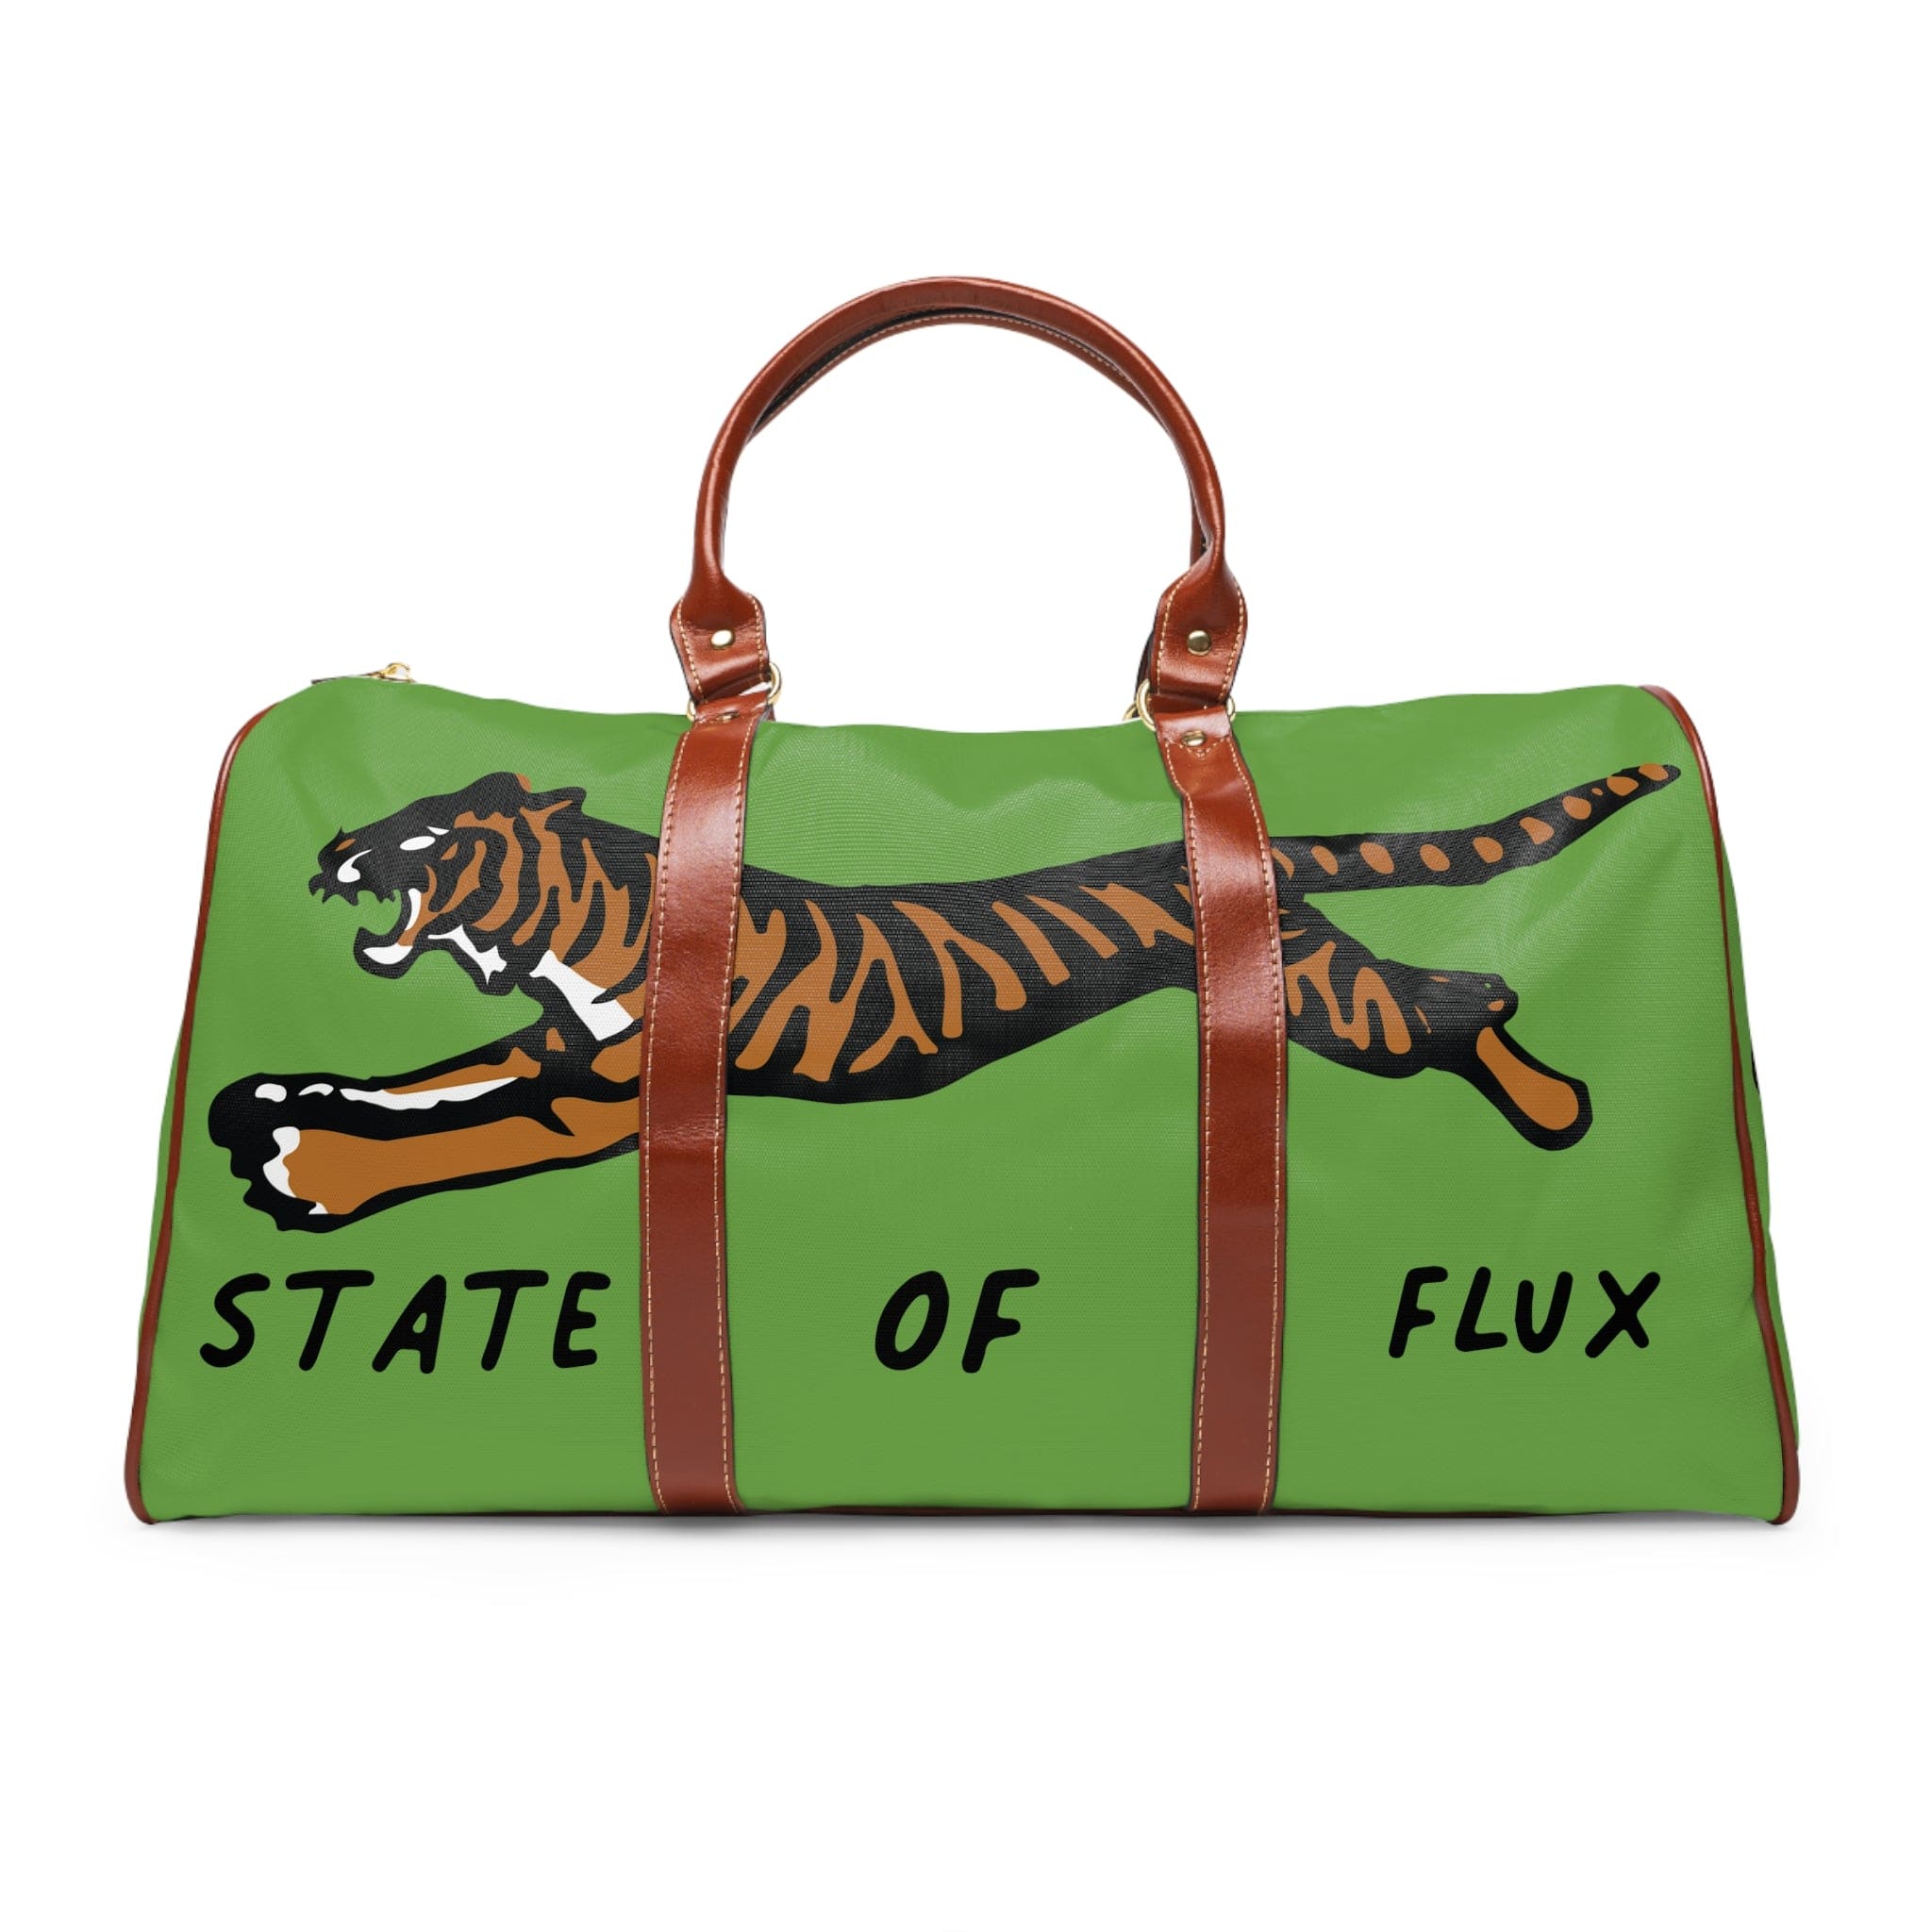 SOF Mojo Weekender Bag in may green - State Of Flux - State Of Flux